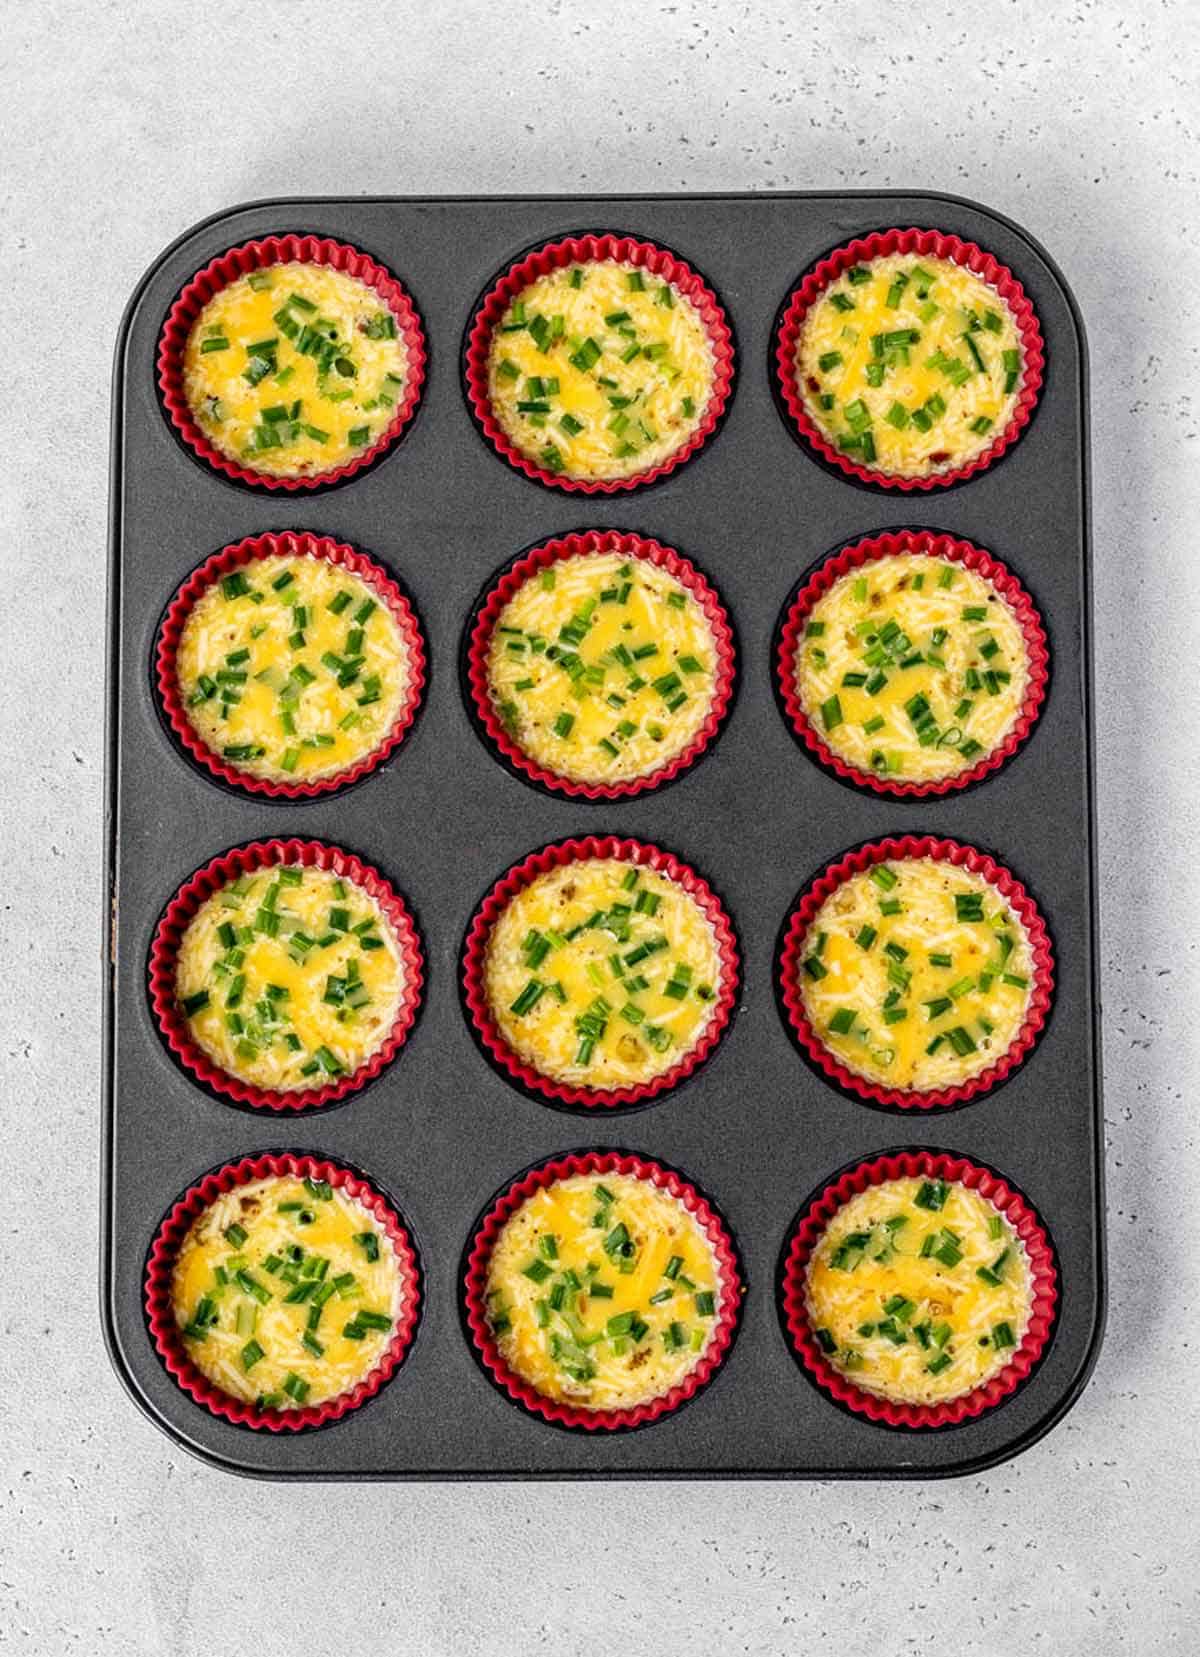 A muffin tin with 12 muffin cups filled with crustless mini quiches ready to be baked.